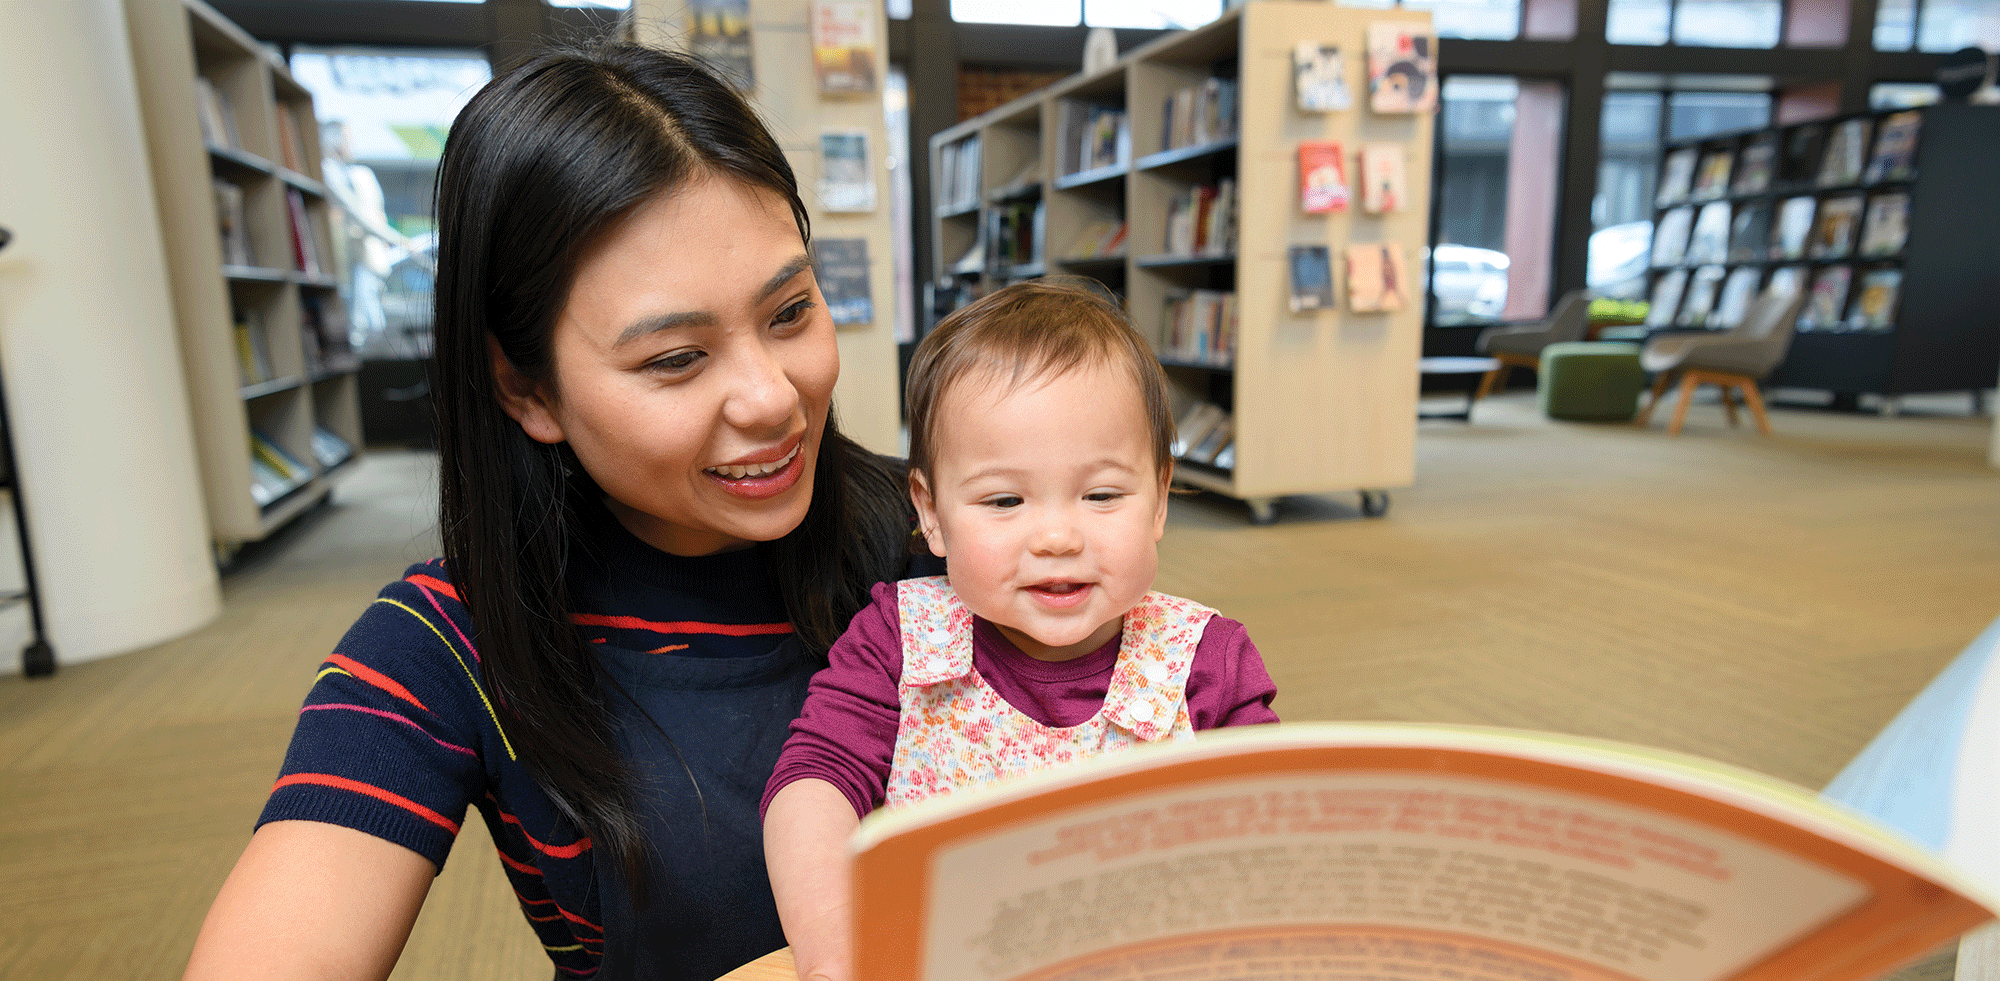 A woman reading to her daughter in a library